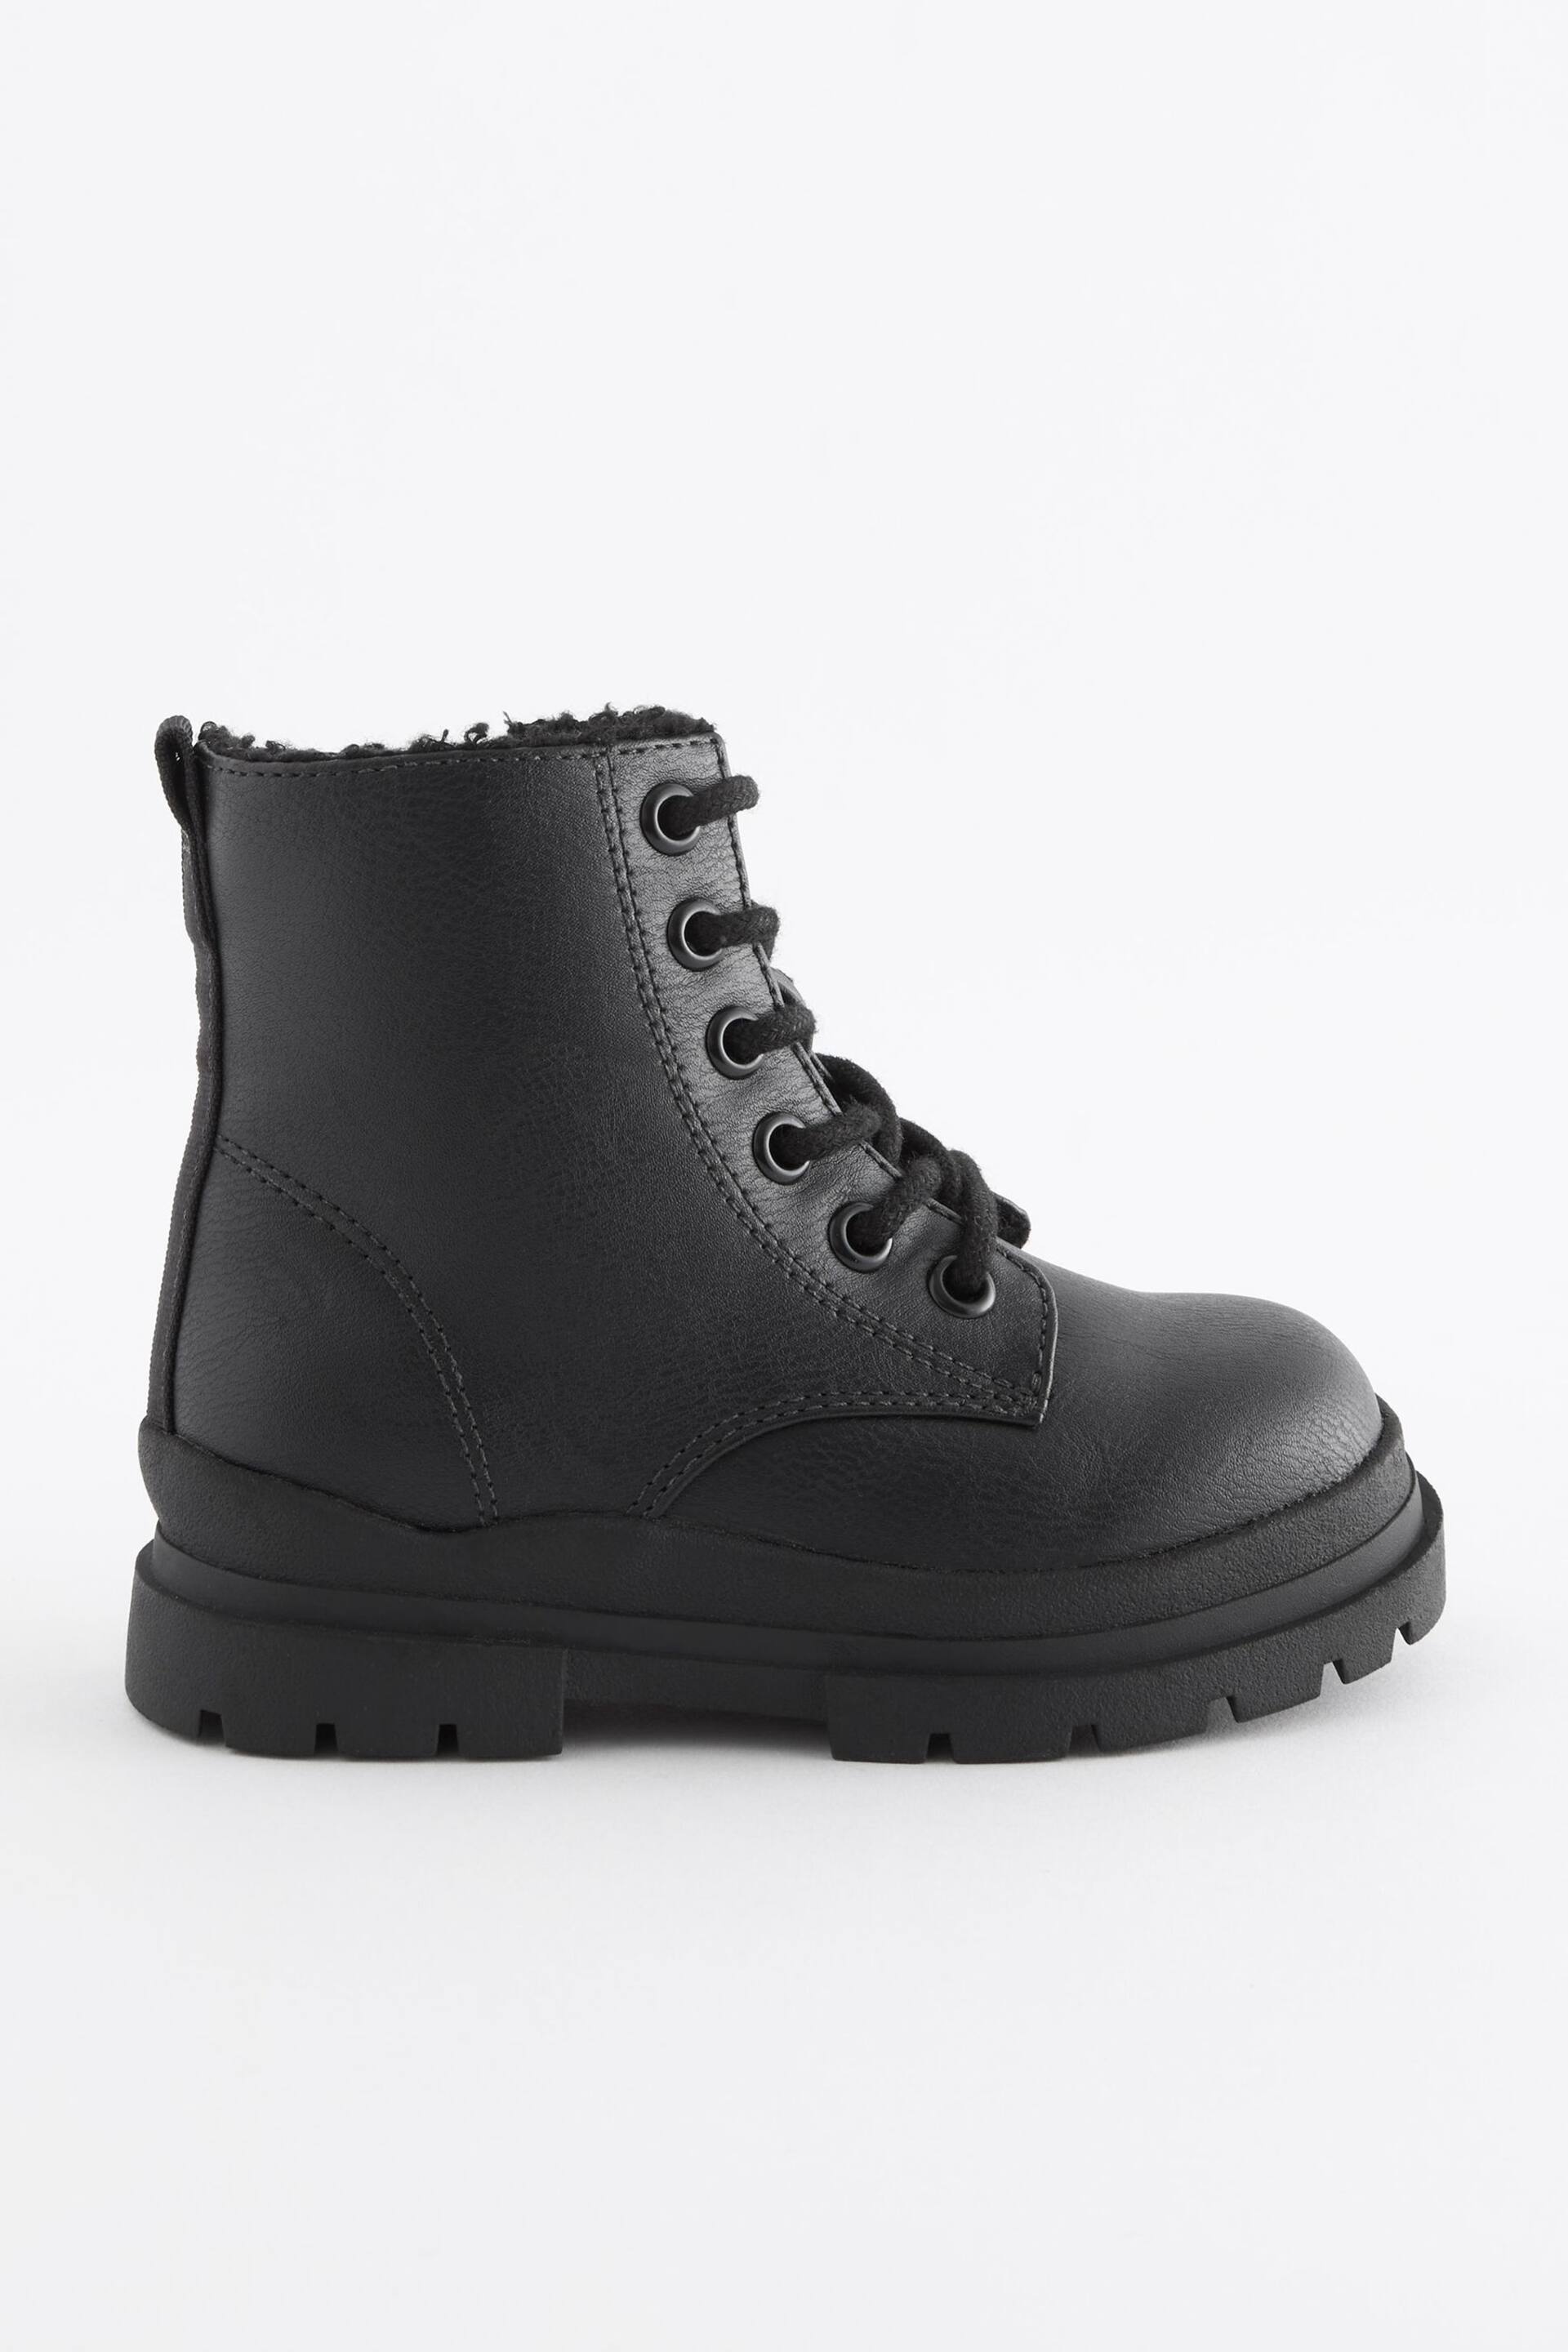 Black Warm Lined Lace-Up Boots - Image 2 of 5